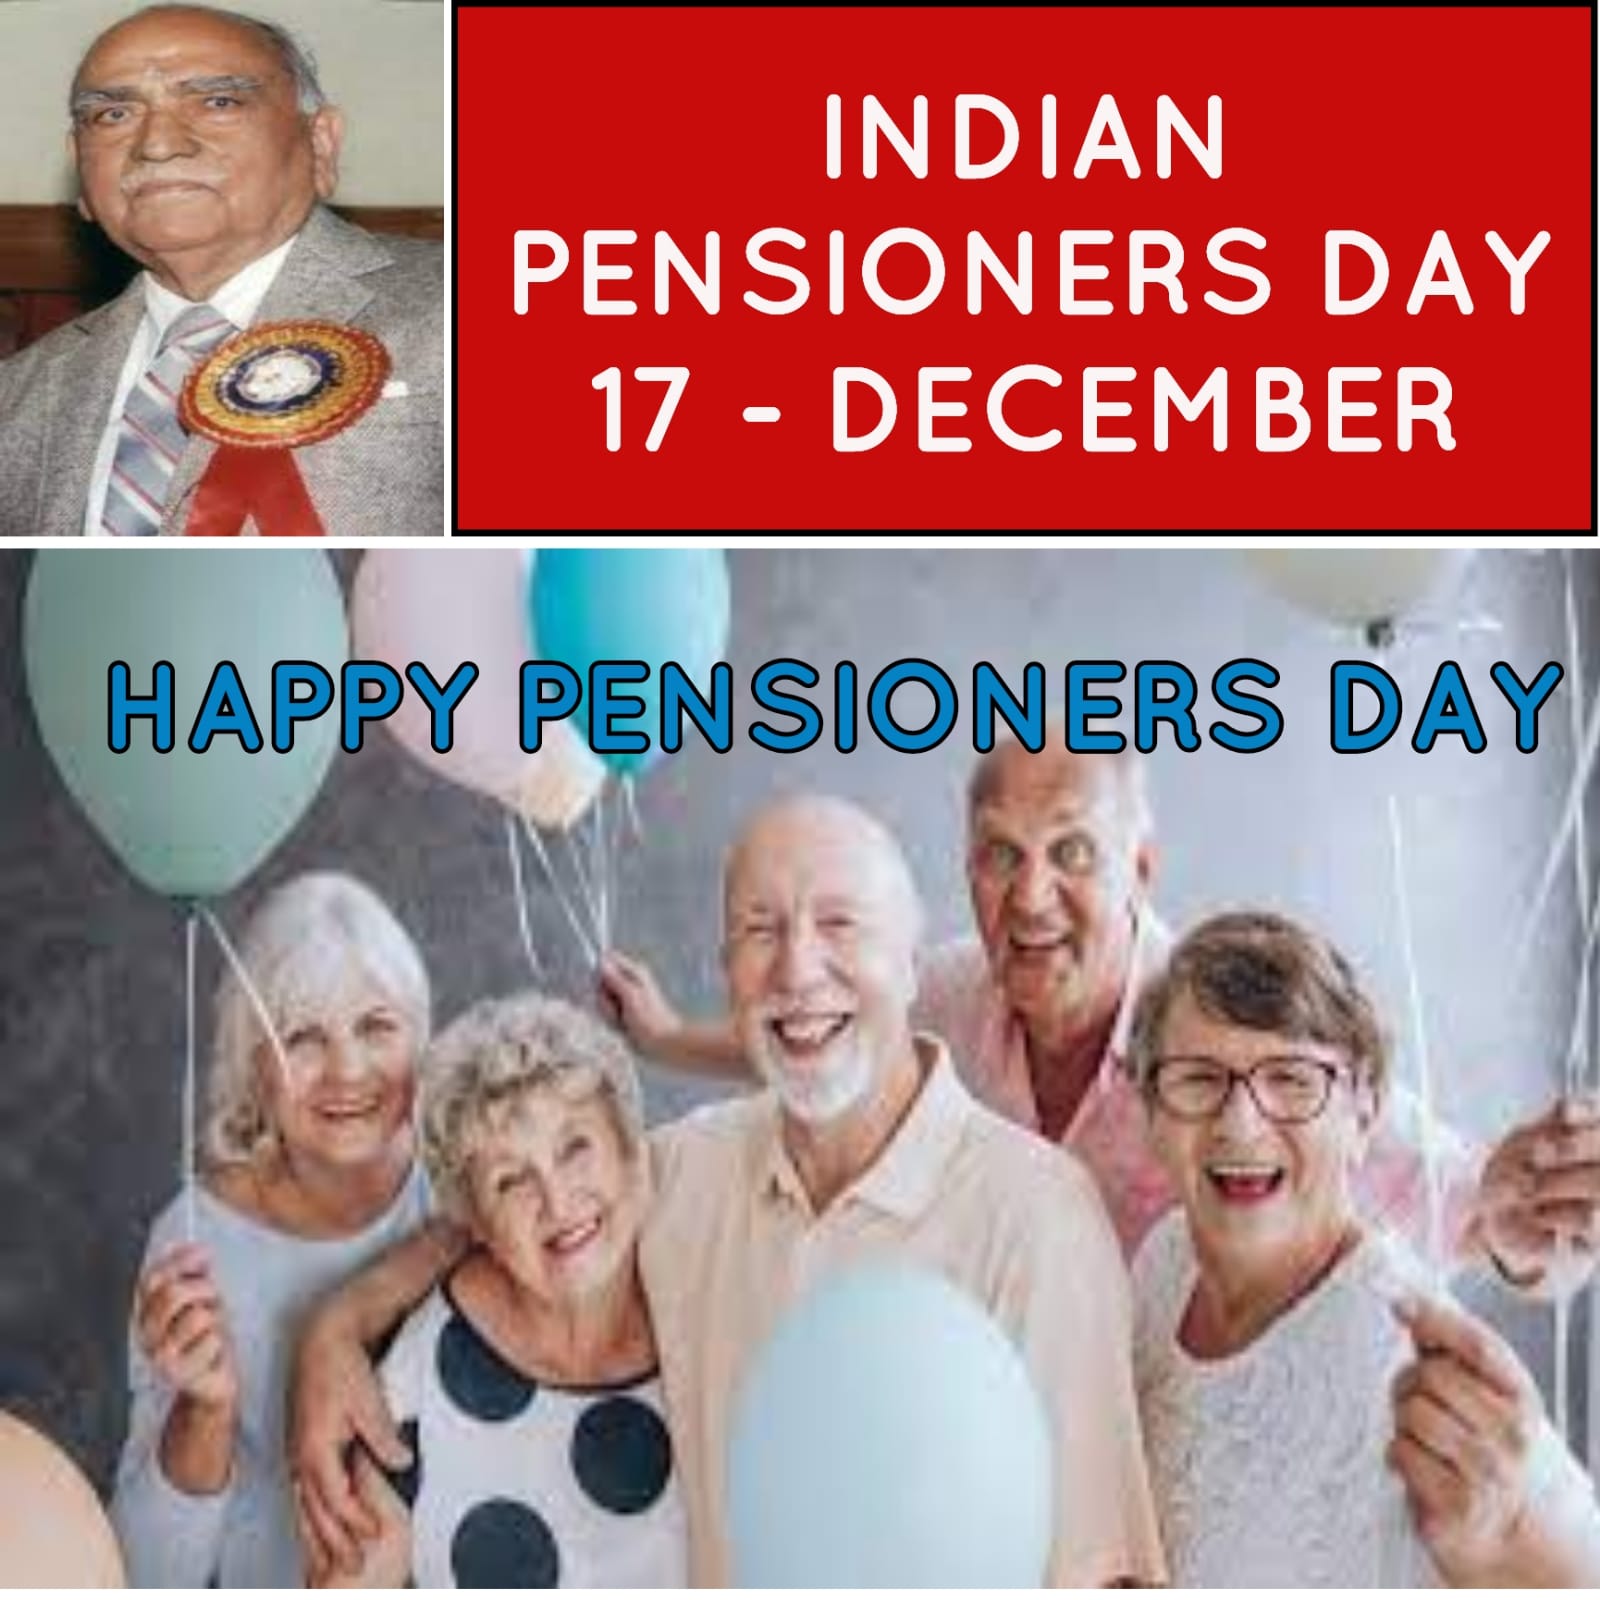 PENSIONERS DAY